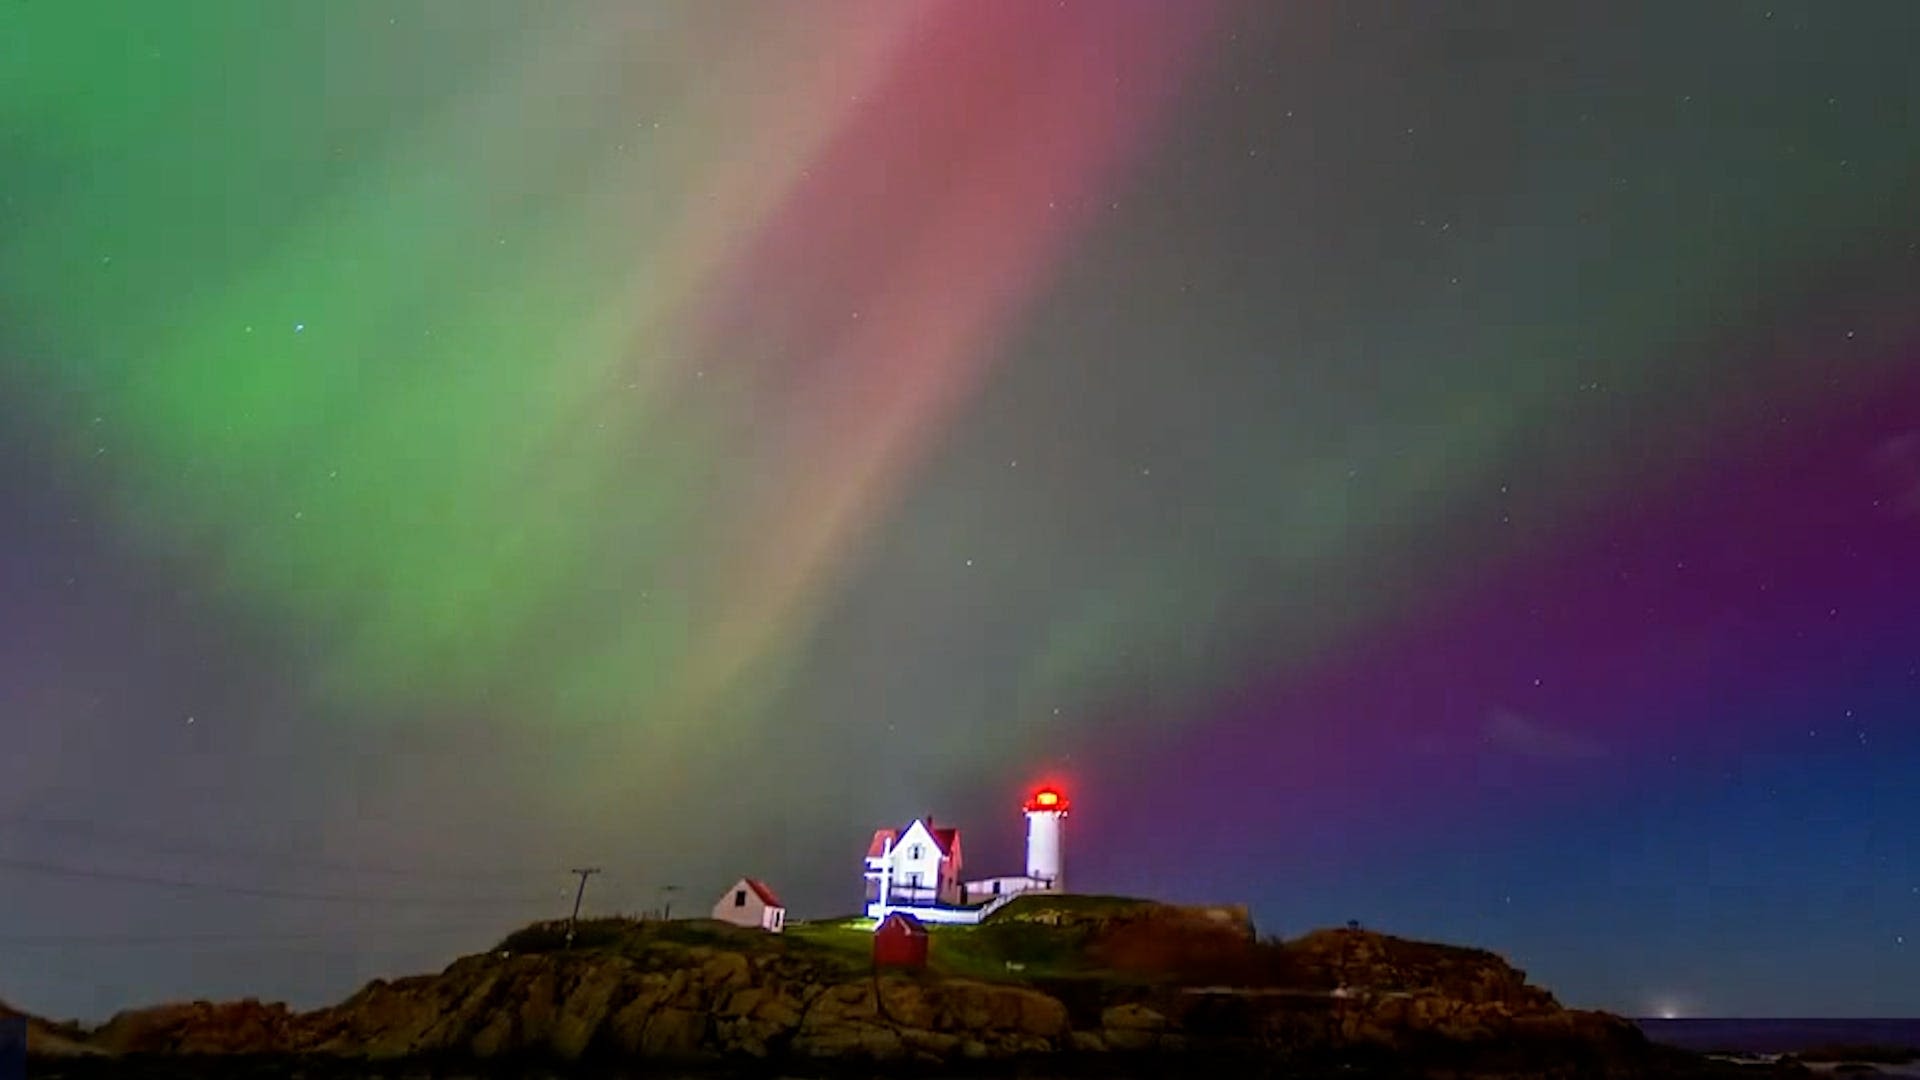 Taking photos of the northern lights with your smartphone? Tips to get the best picture